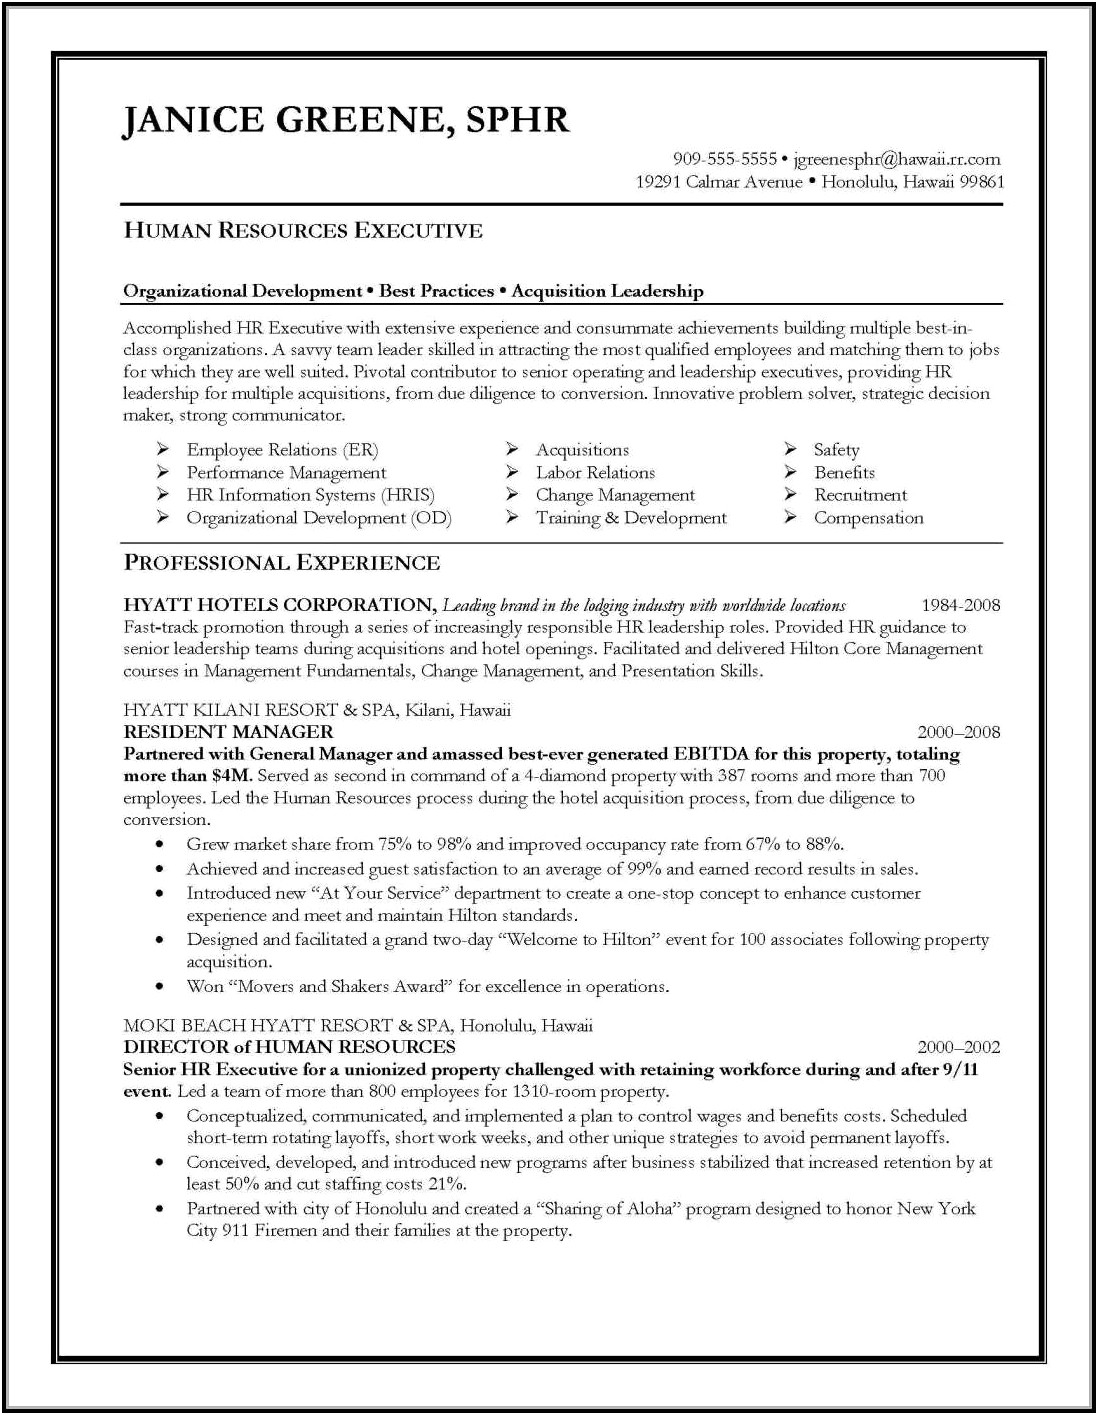 Global Resume Writers Review Is It Good